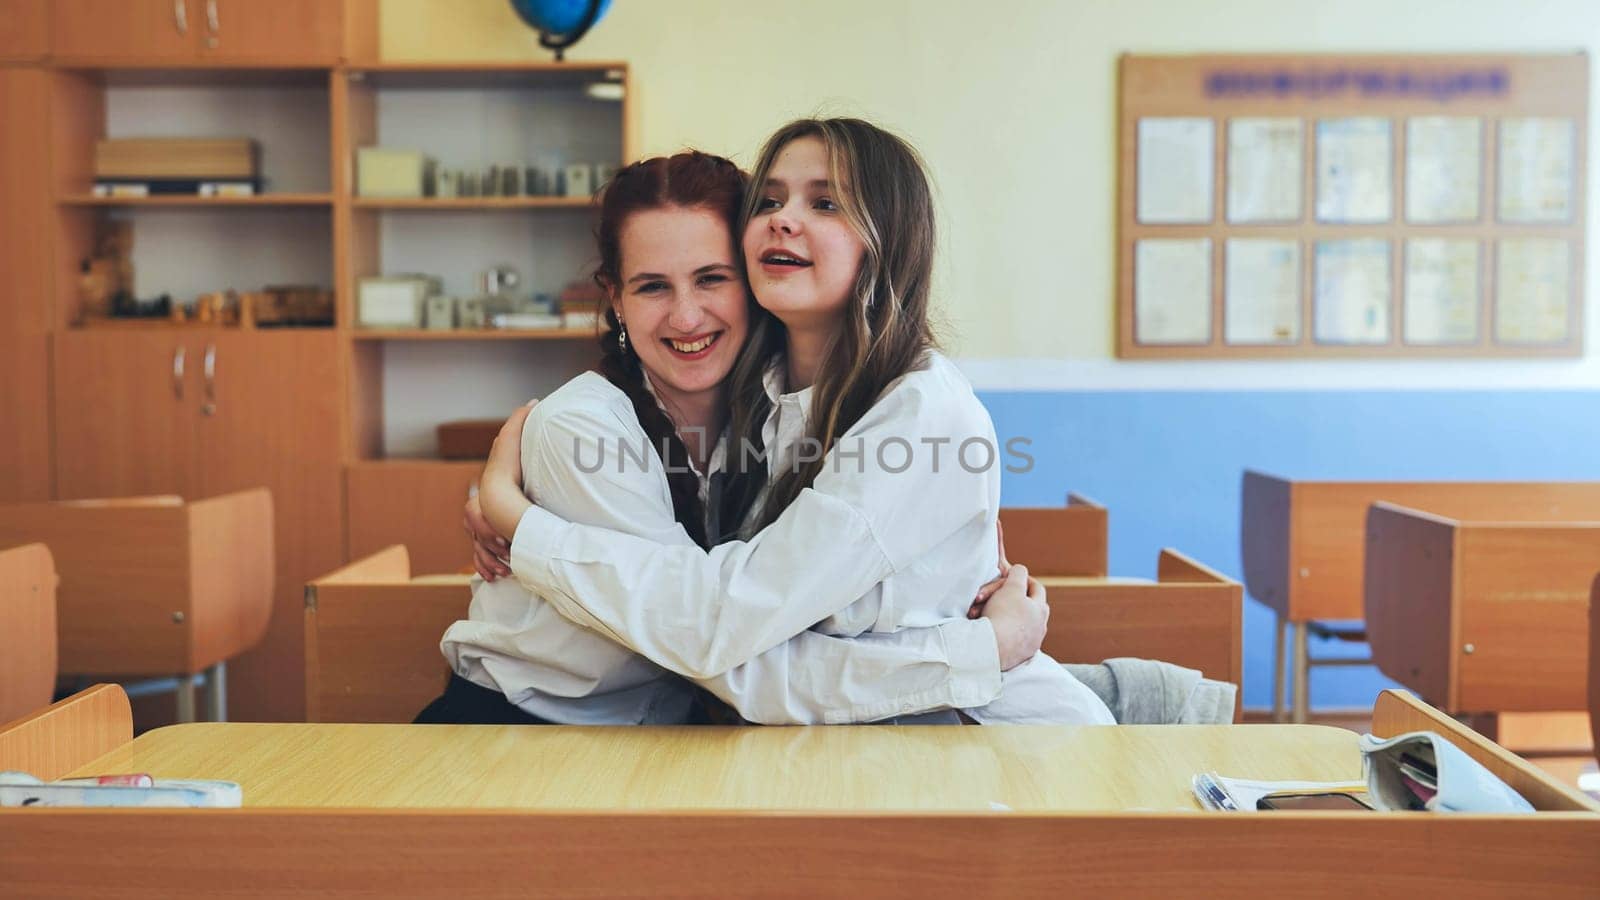 Girl students hugging in a classroom at school. Translate: Information. by DovidPro